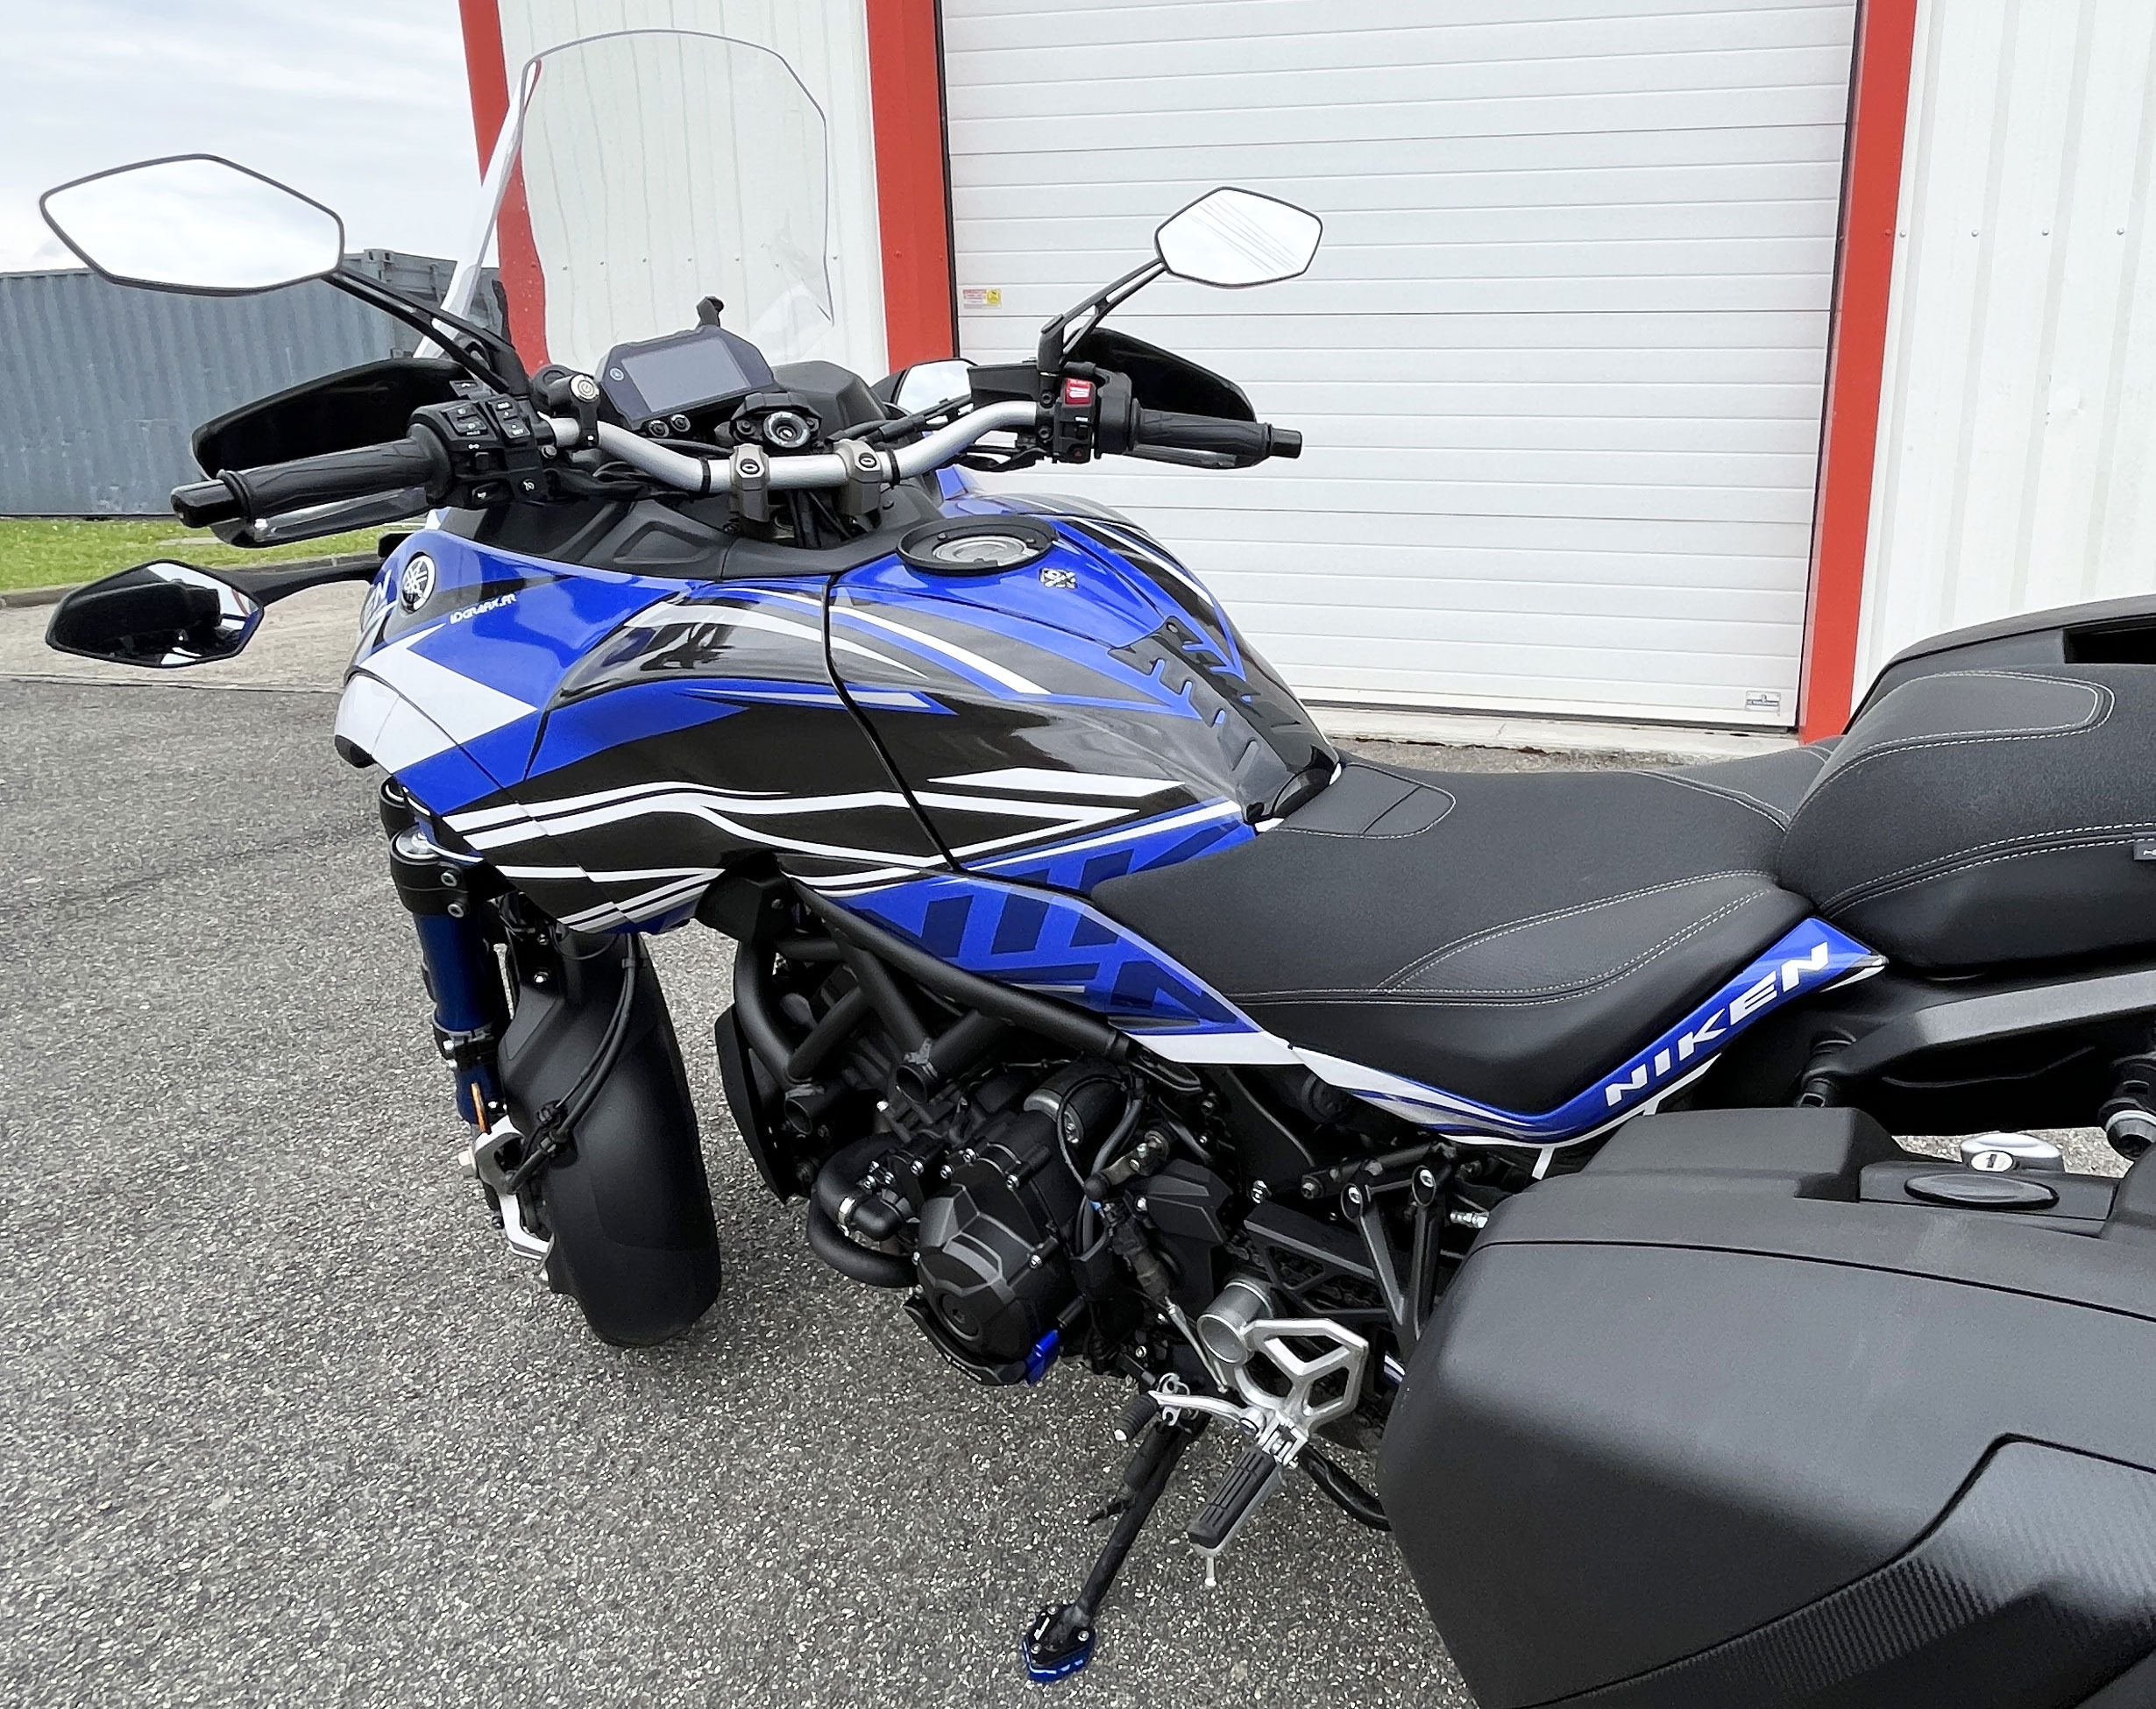 NEWS - Graphic kit for the Yamaha Nikken motorcycle